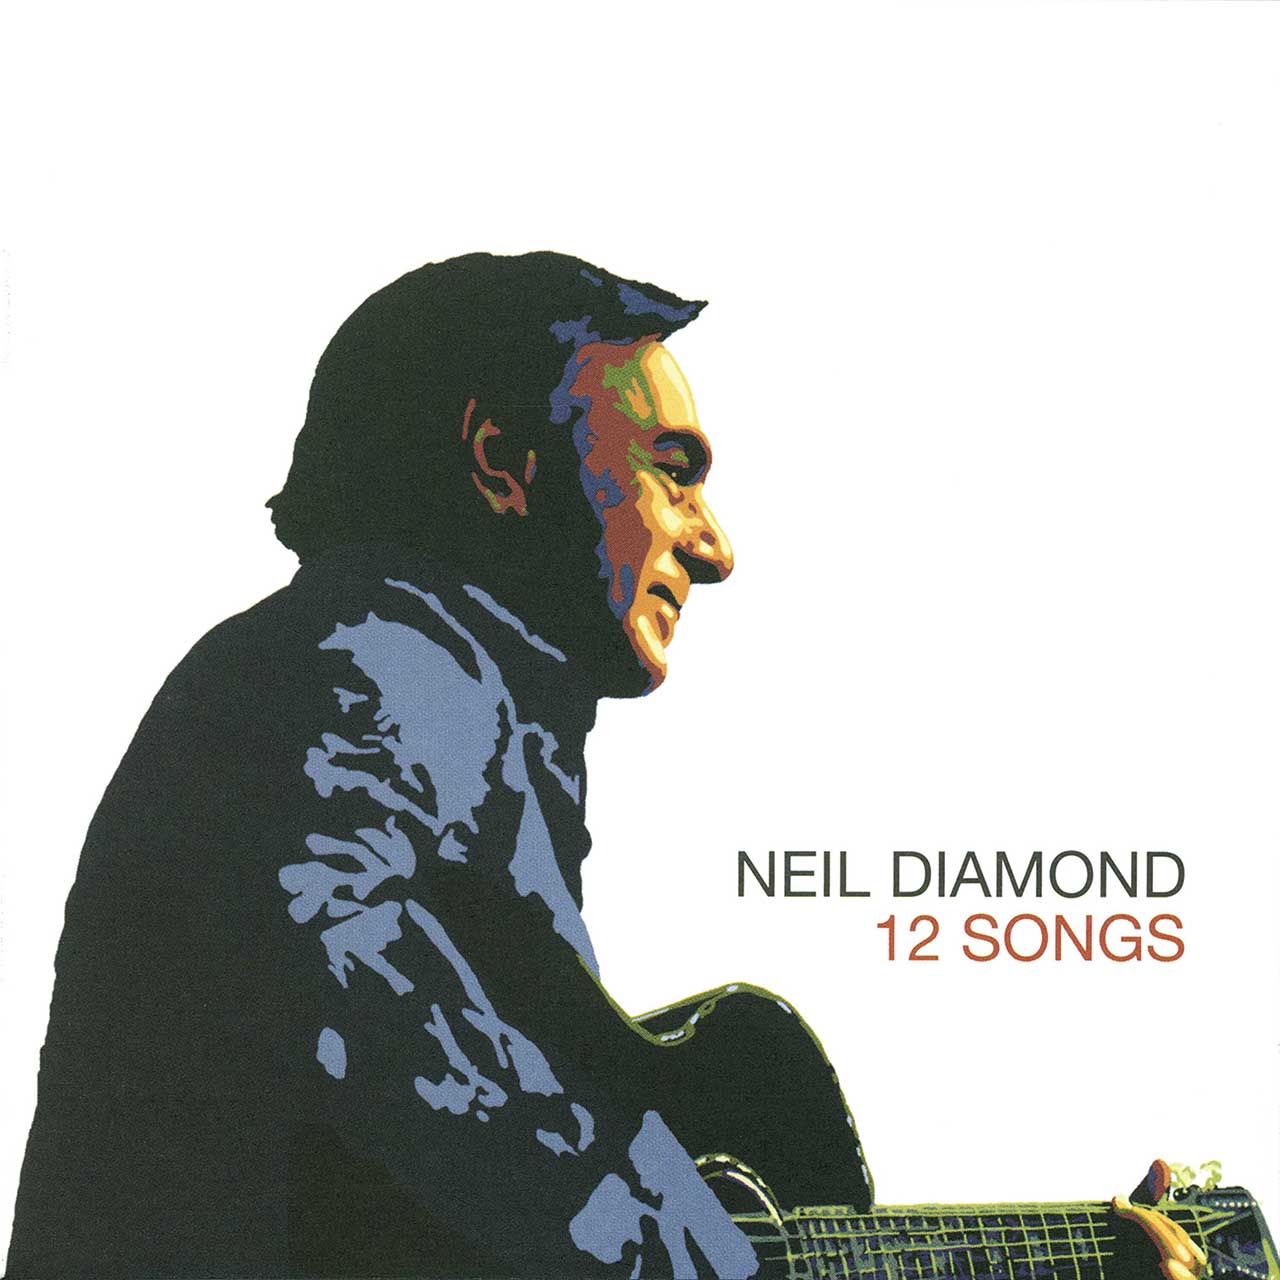 Neil Diamond Shares ’12 Songs’ Deluxe Edition